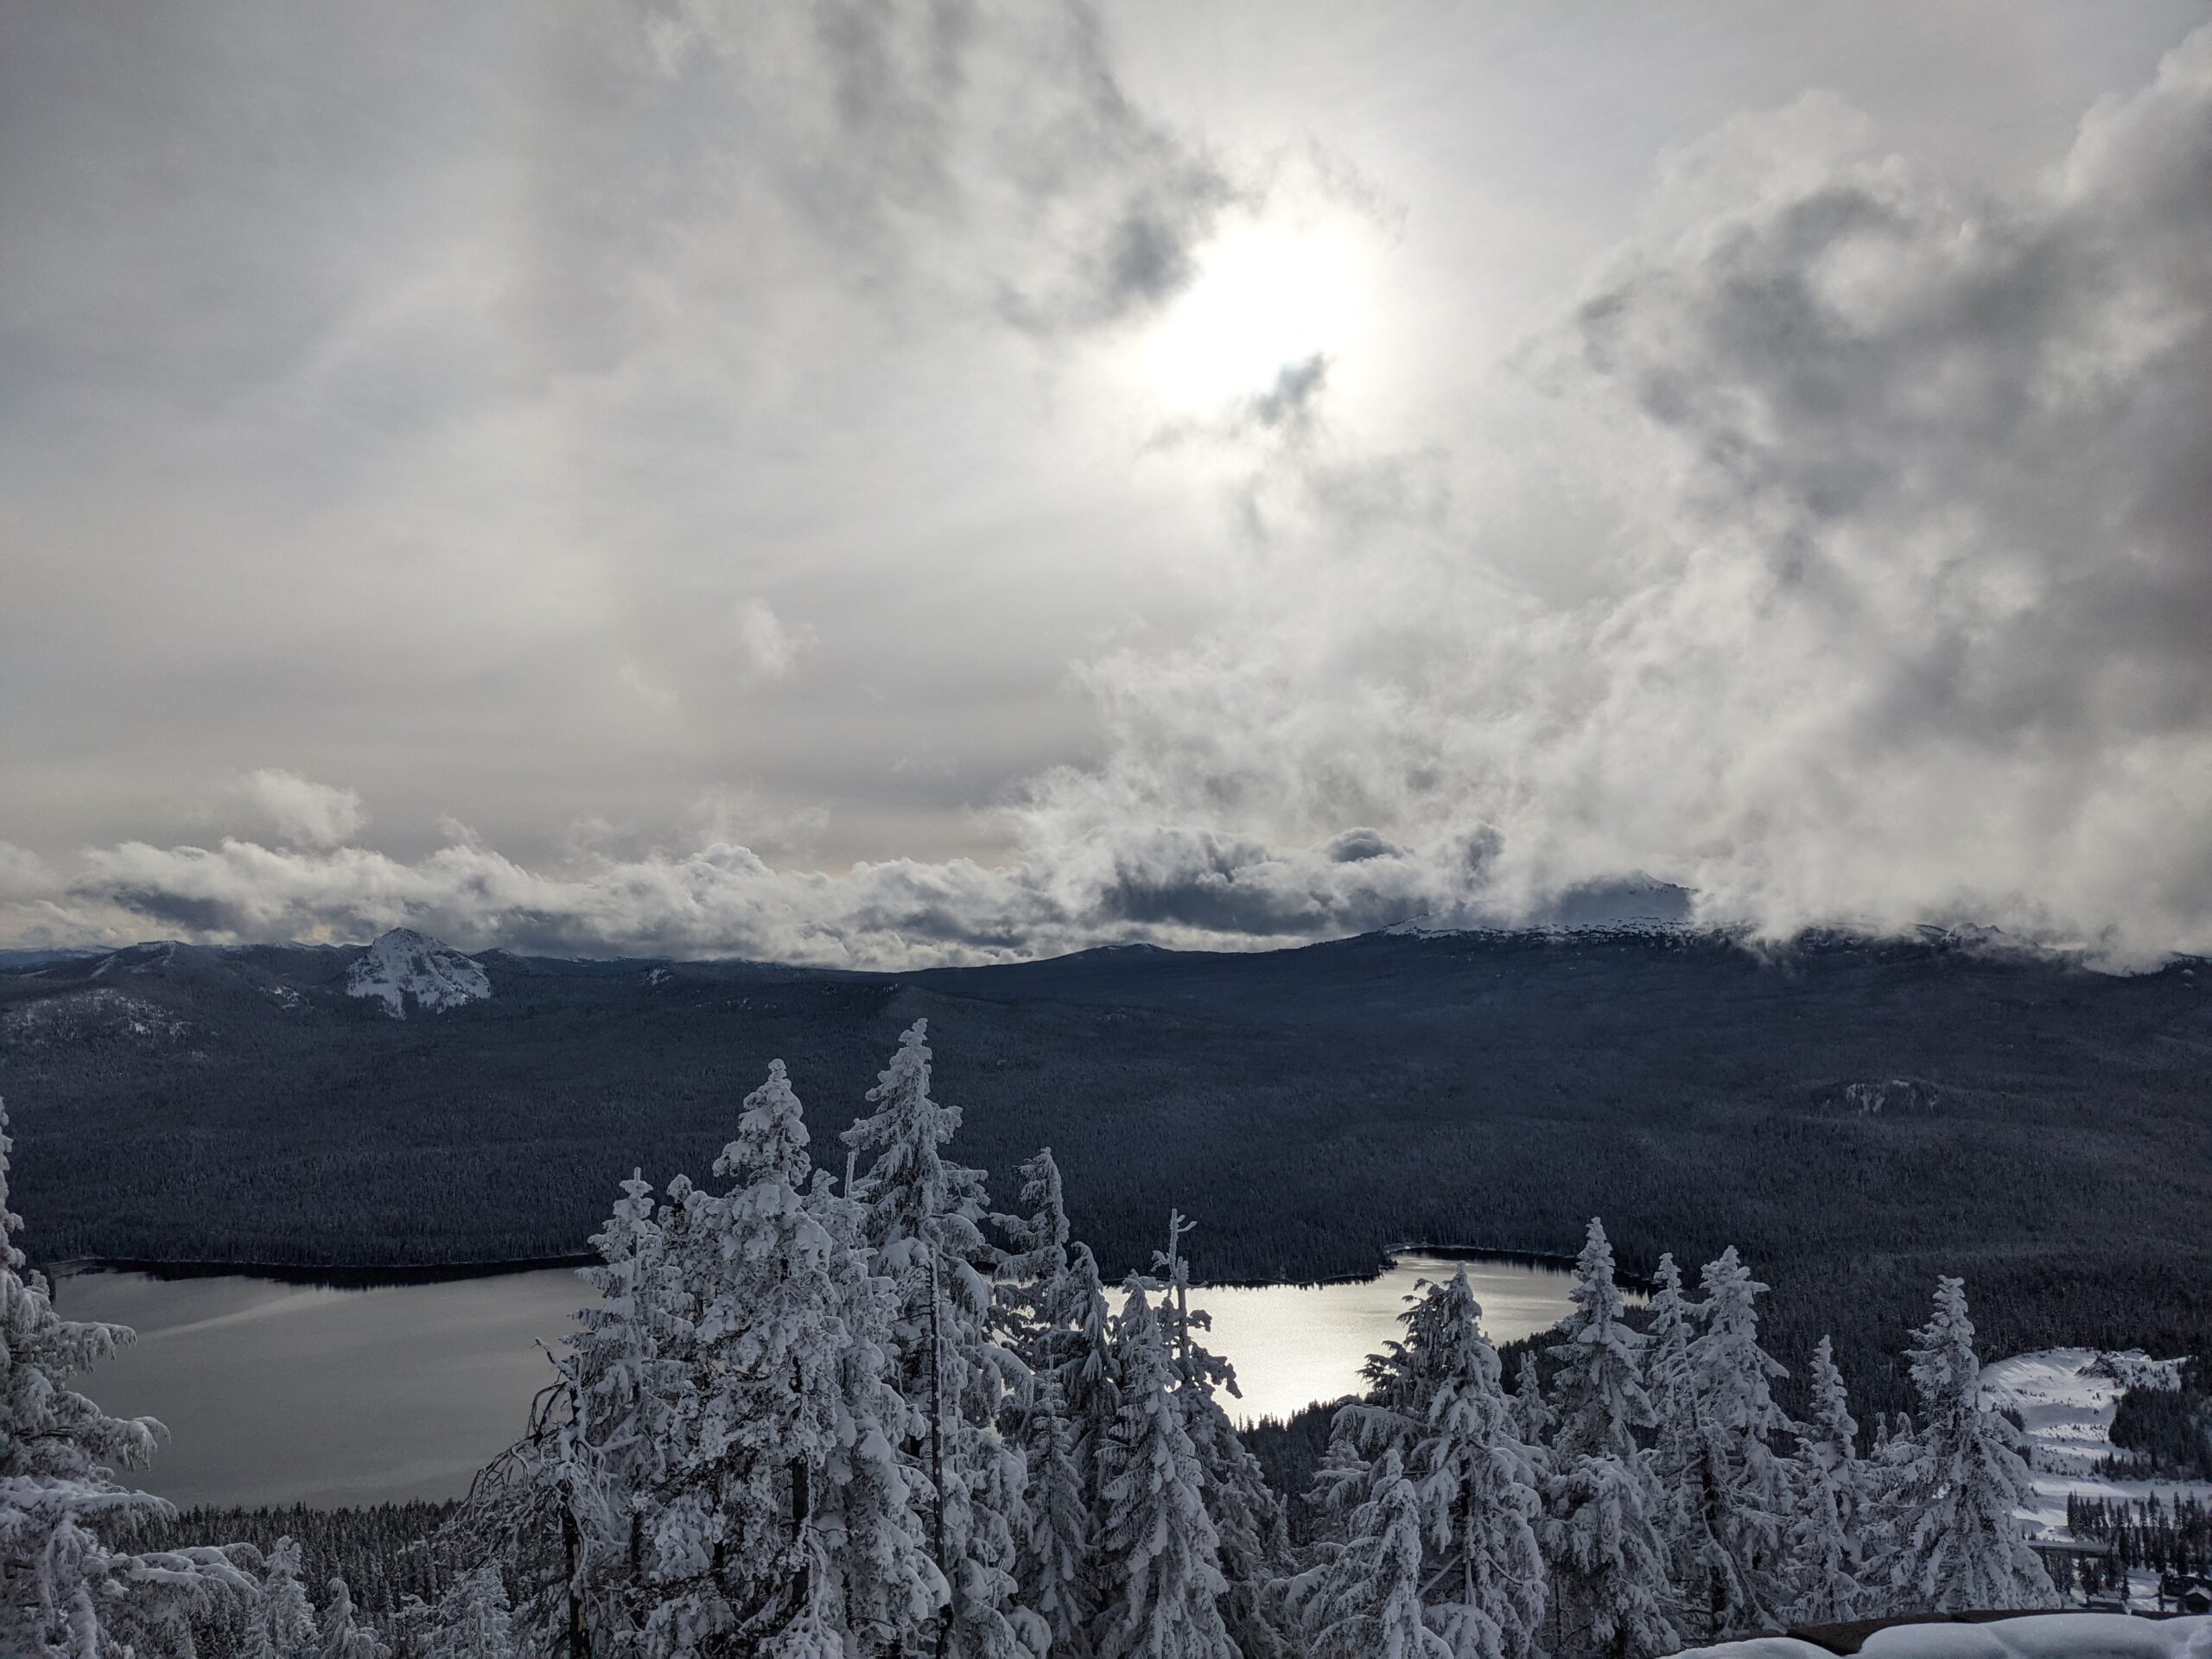 Willamette Pass Resort offers some epic views of area lakes. 